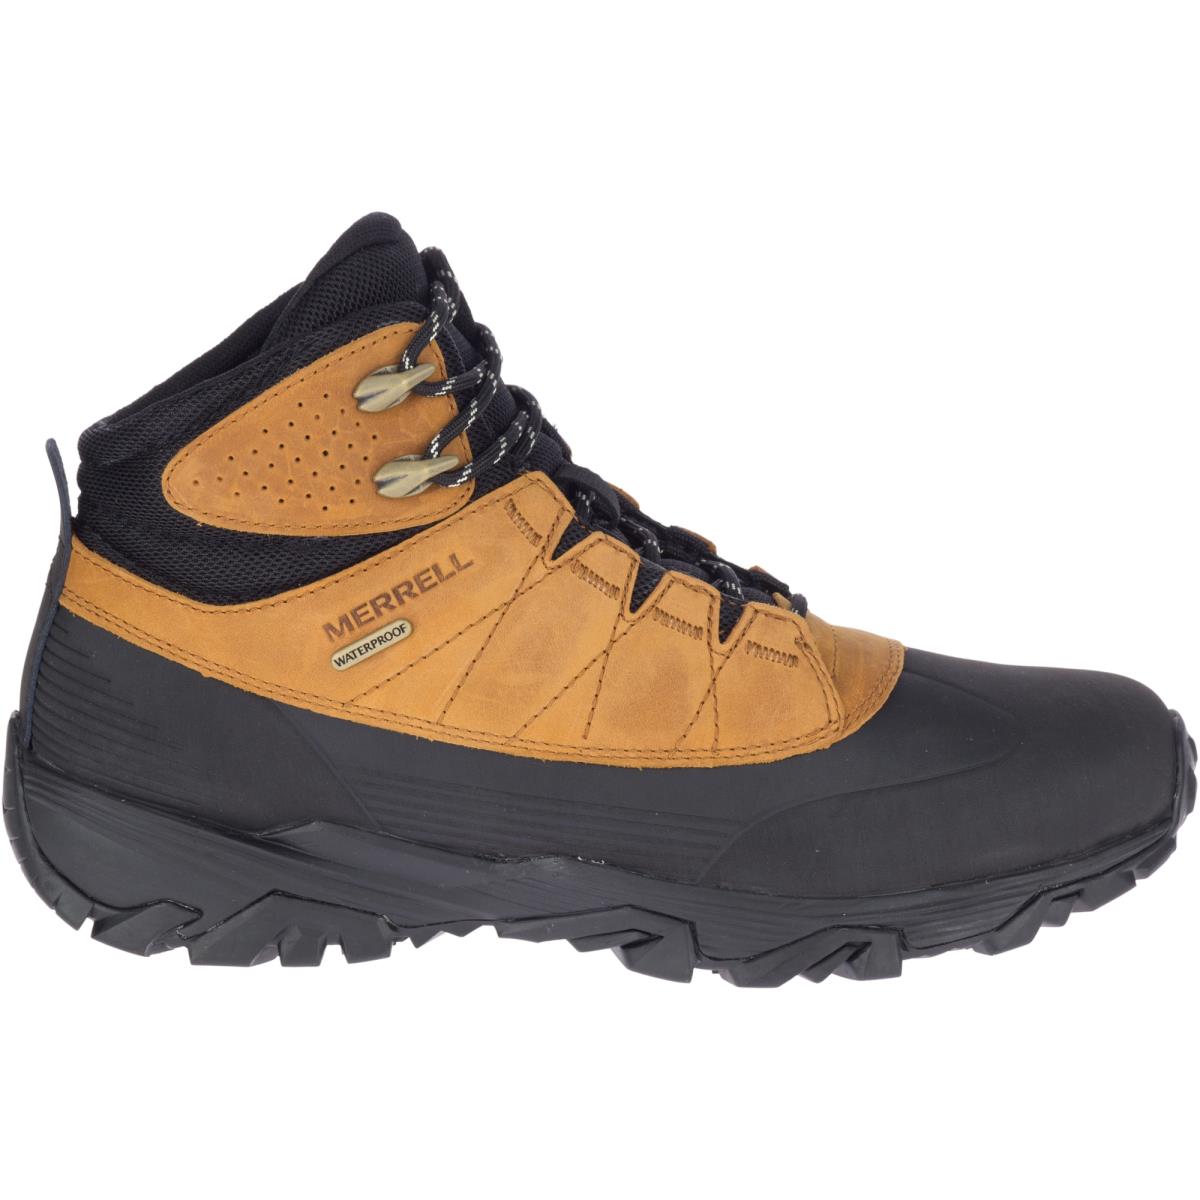 Merrell Men Coldpack Ice+ 6 Polar Waterproof Boots Leather Wheat